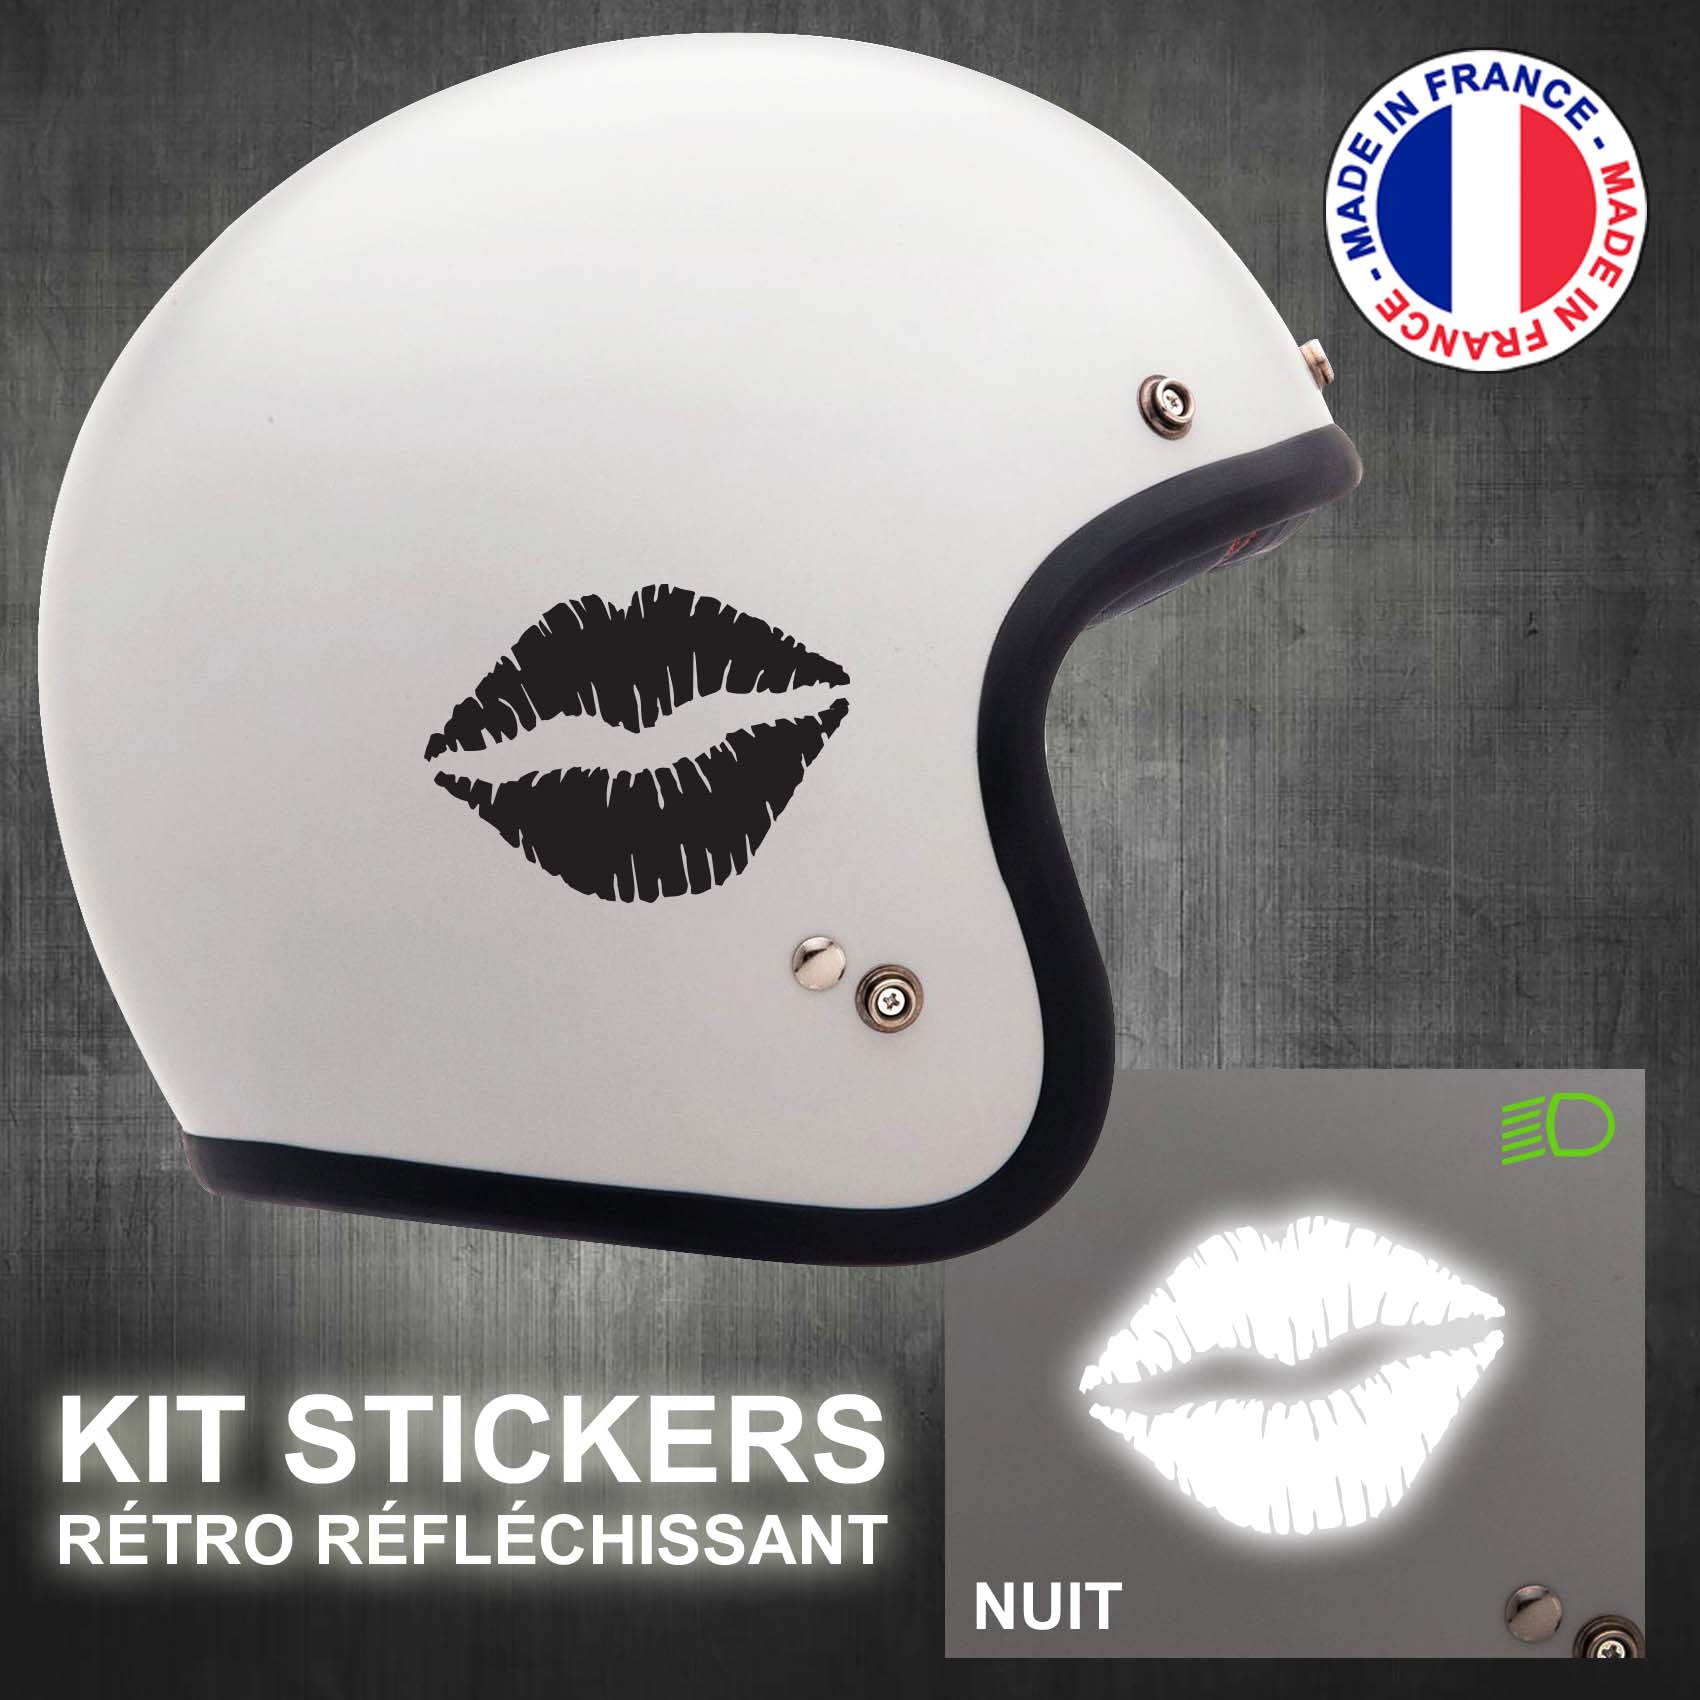 stickers-casque-moto-kiss-ref1-retro-reflechissant-autocollant-moto-velo-tuning-racing-route-sticker-casques-adhesif-scooter-nuit-securite-decals-personnalise-personnalisable-min